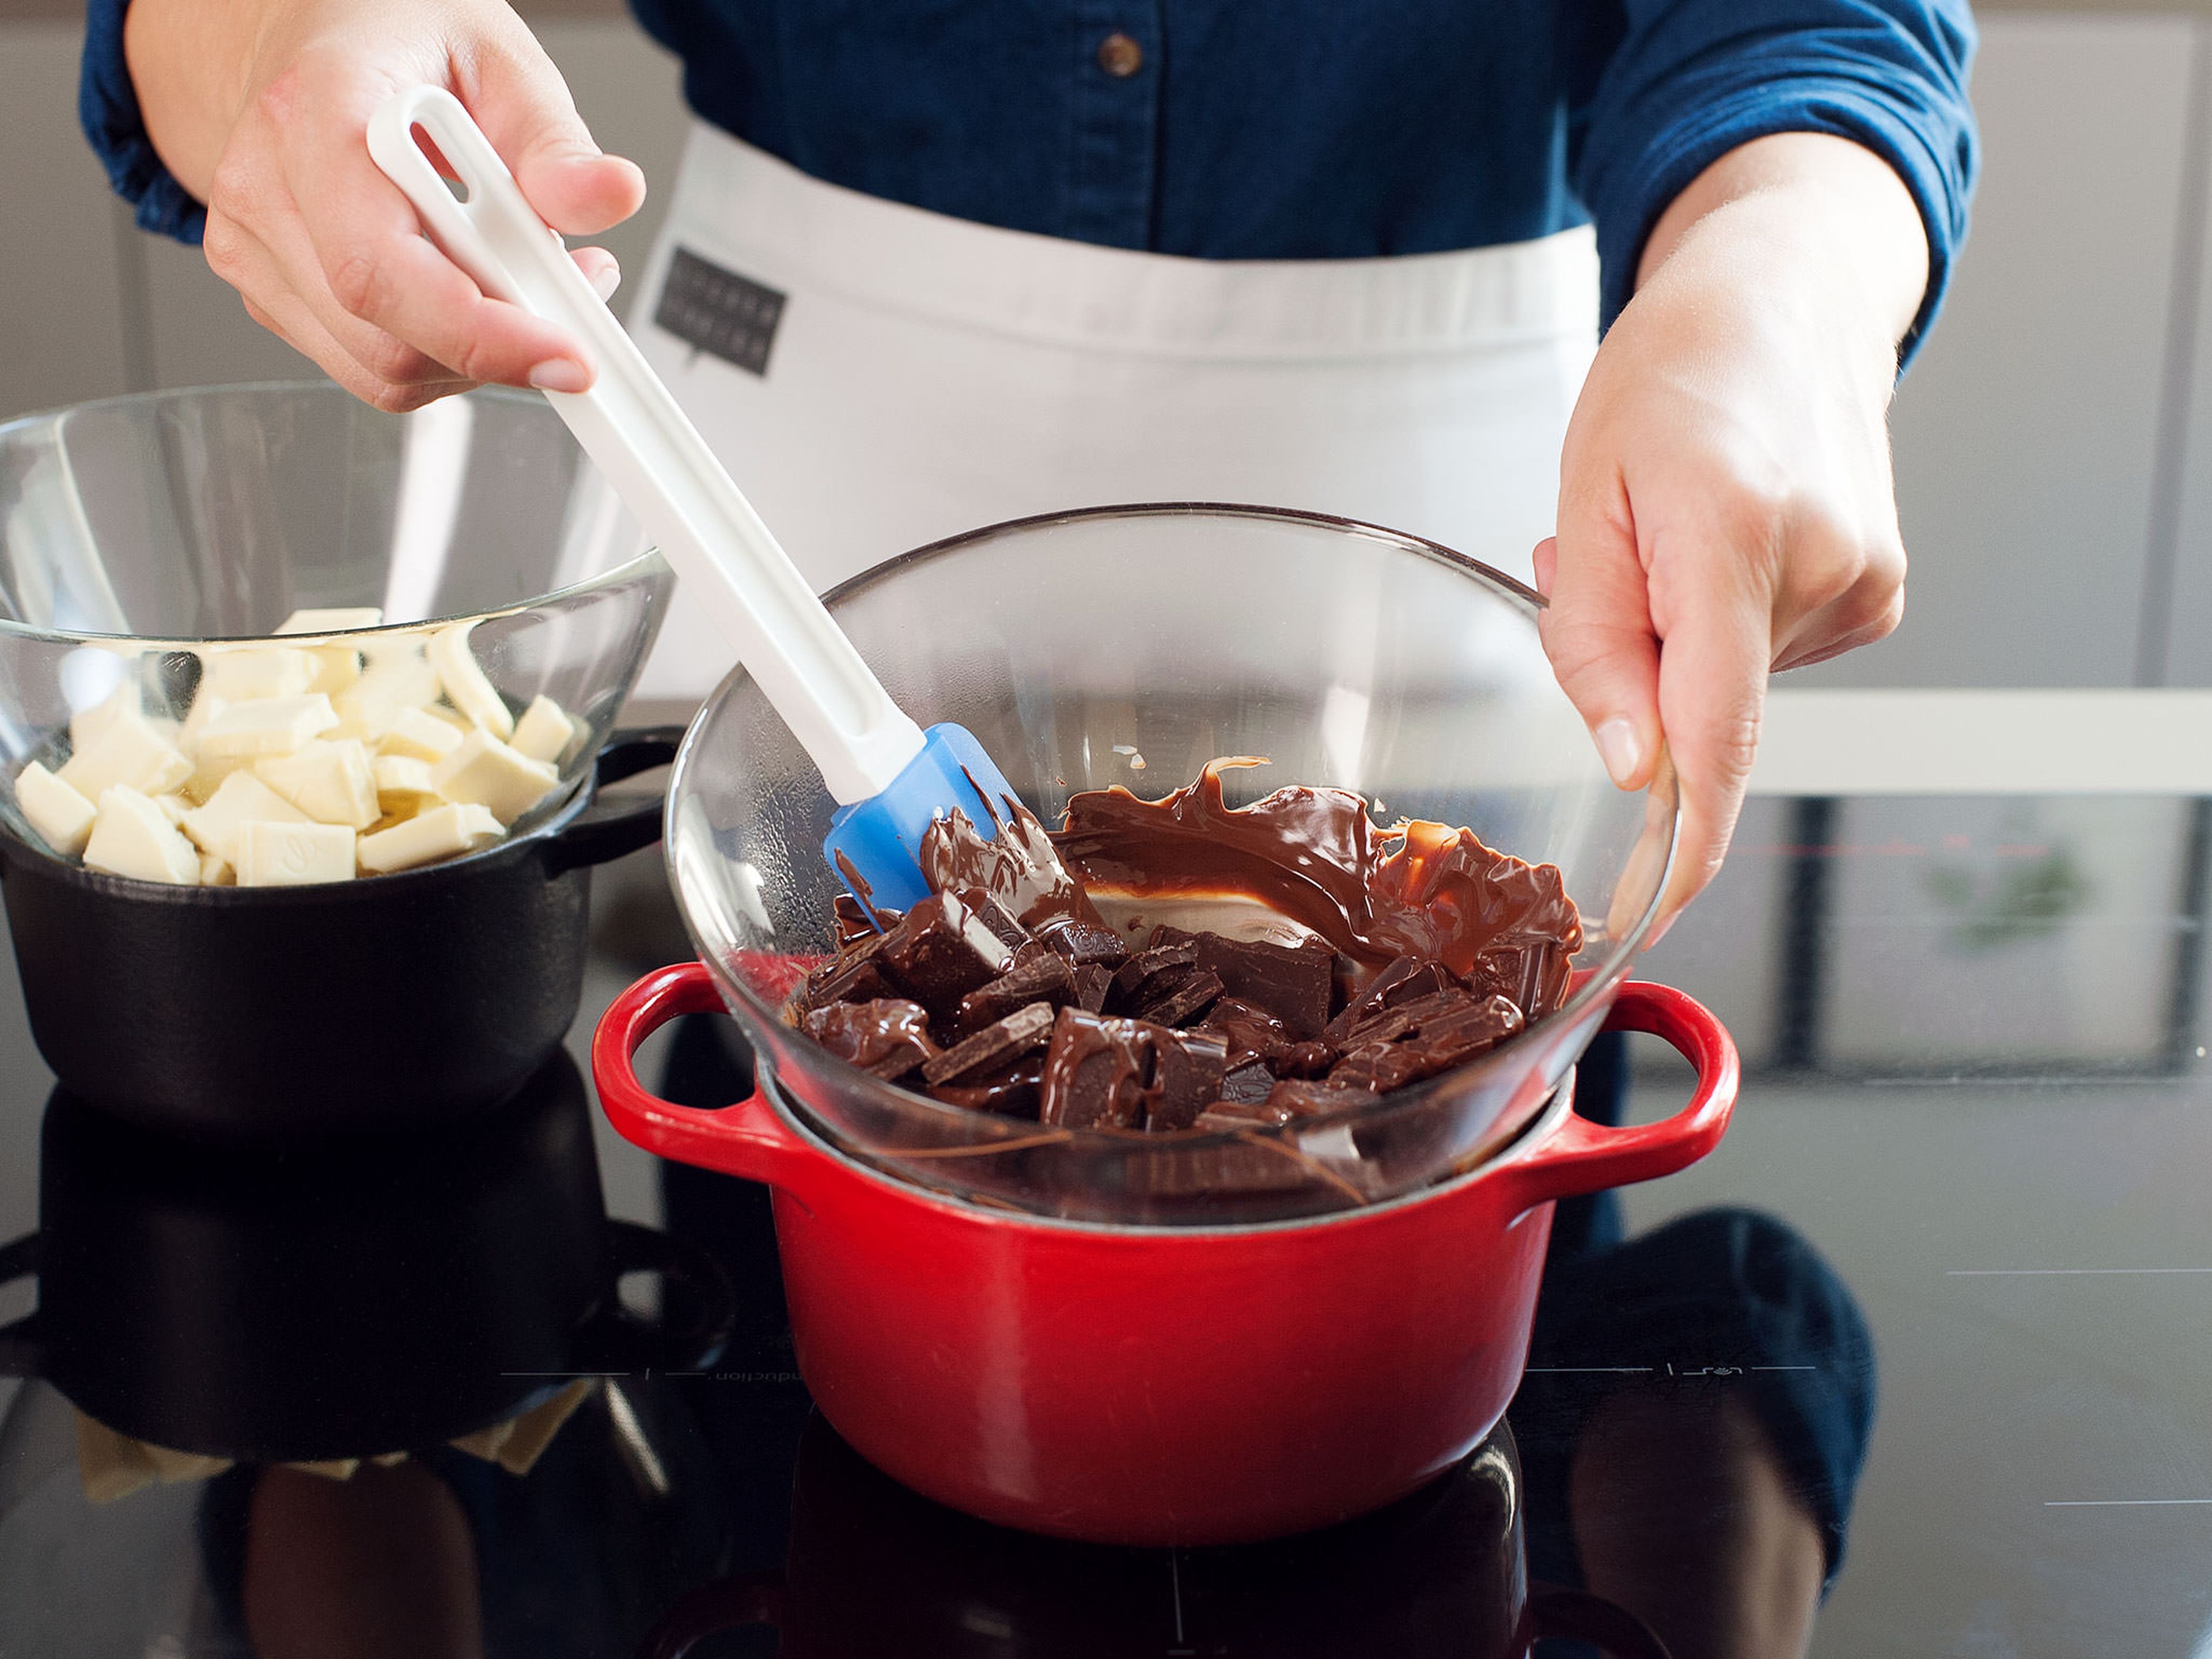 Add ¾ of the dark chocolate to a heatproof bowl and set it over a saucepan filled with simmering water. Stir chocolate with a rubber spatula occasionally until melted and smooth. Remove from heat and stir in remaining chocolate until just melted. Pour melted chocolate onto prepared baking sheet and spread evenly until about ½-cm/¼-in thick.